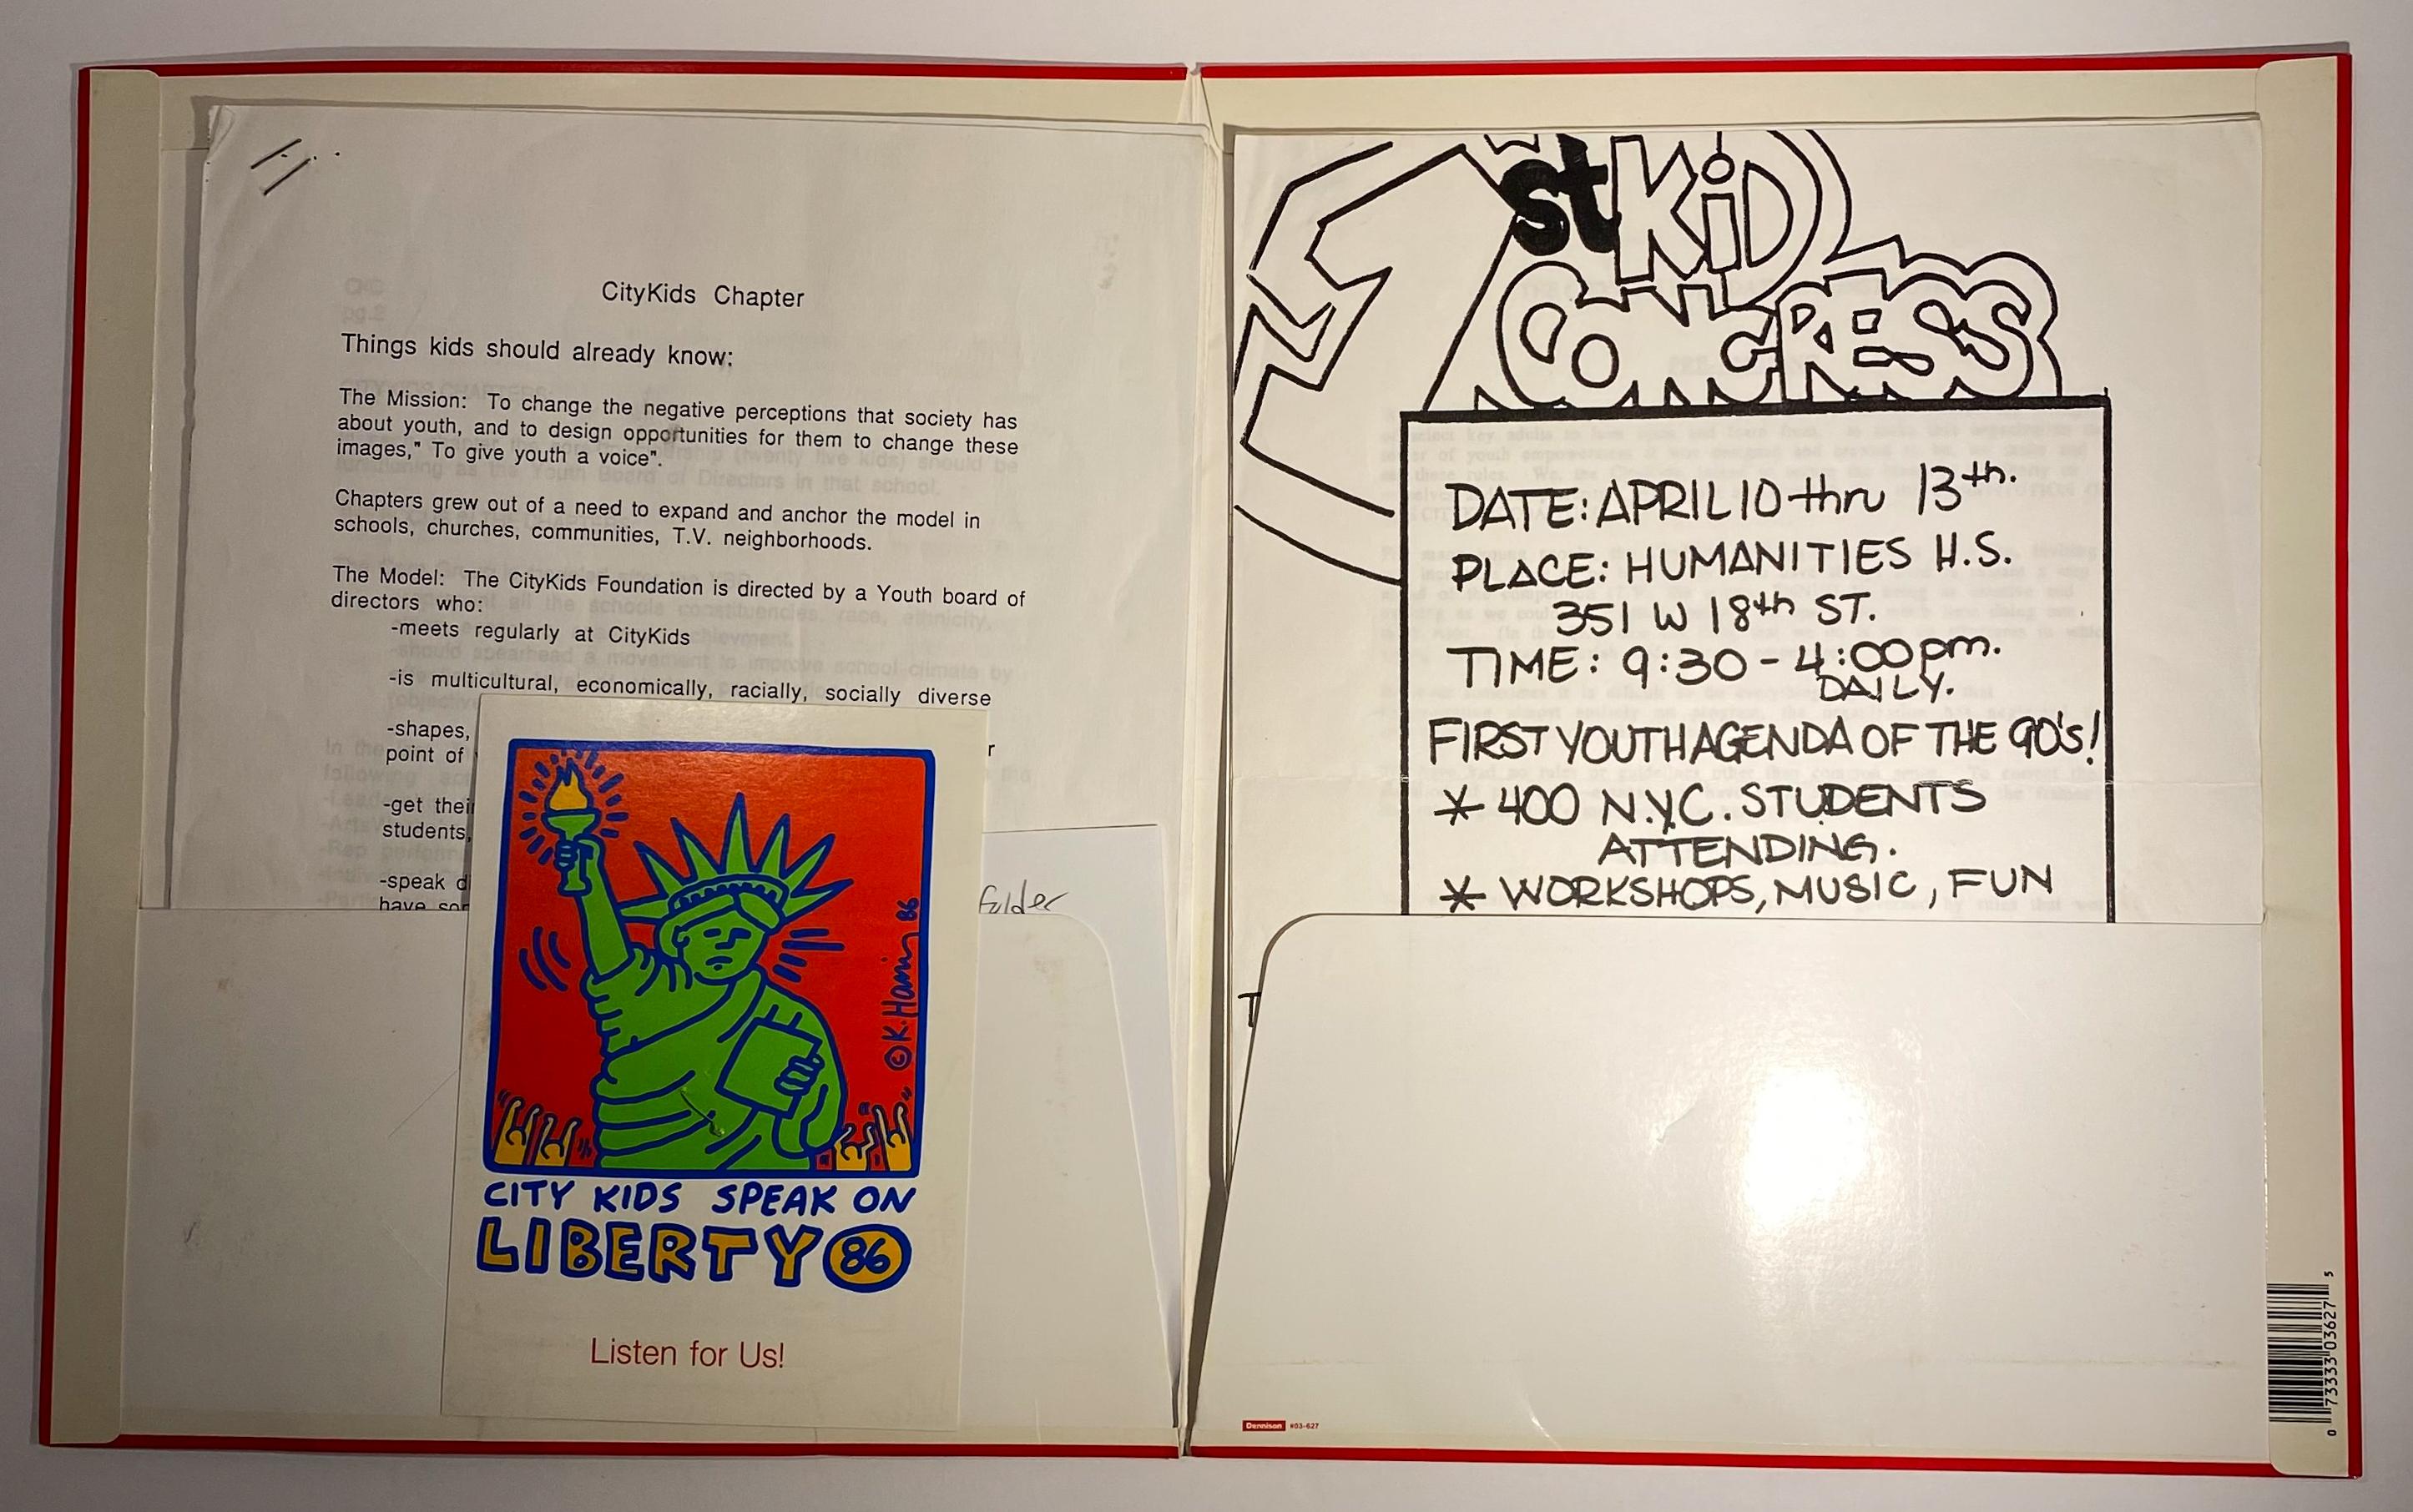 Collection of printed materials pertaining to CityKids, featuring design and artwork by founding member Keith Haring, mostly concerning the 1990 CityKids program along with a memorial tribute to Haring, who passed away in January of that year.